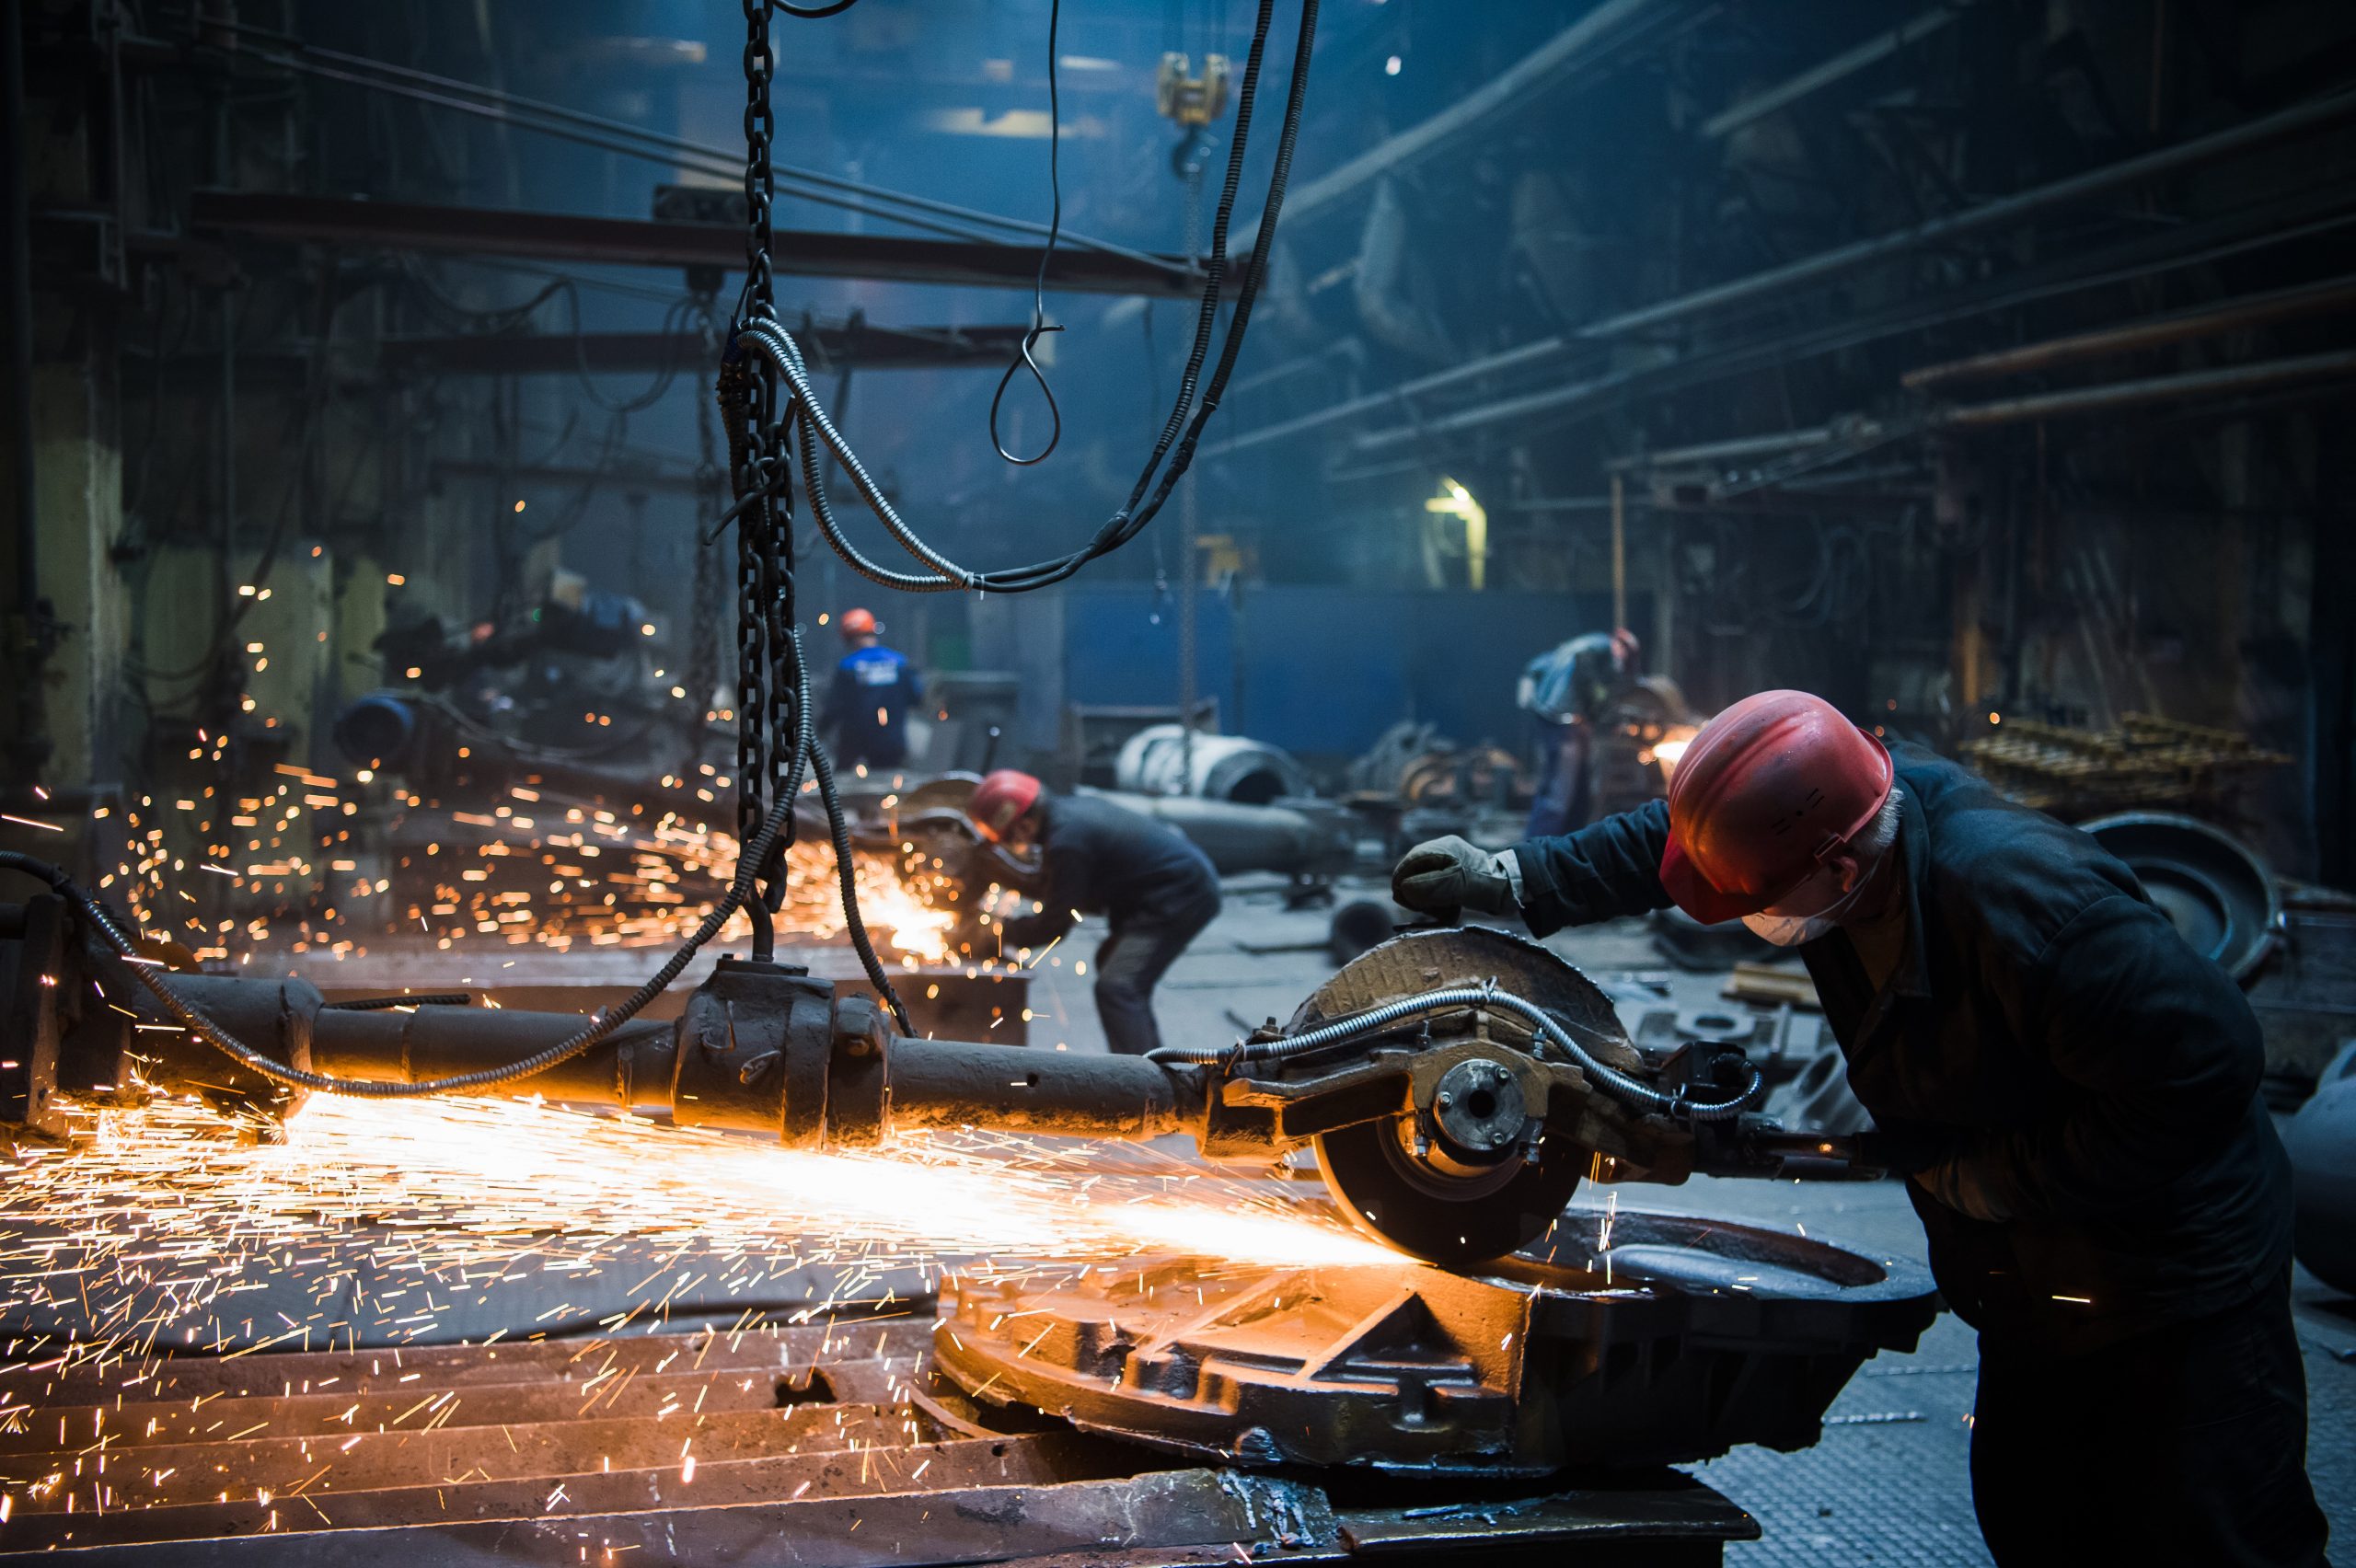 Welder used grinding stone on steel in factory with sparks.